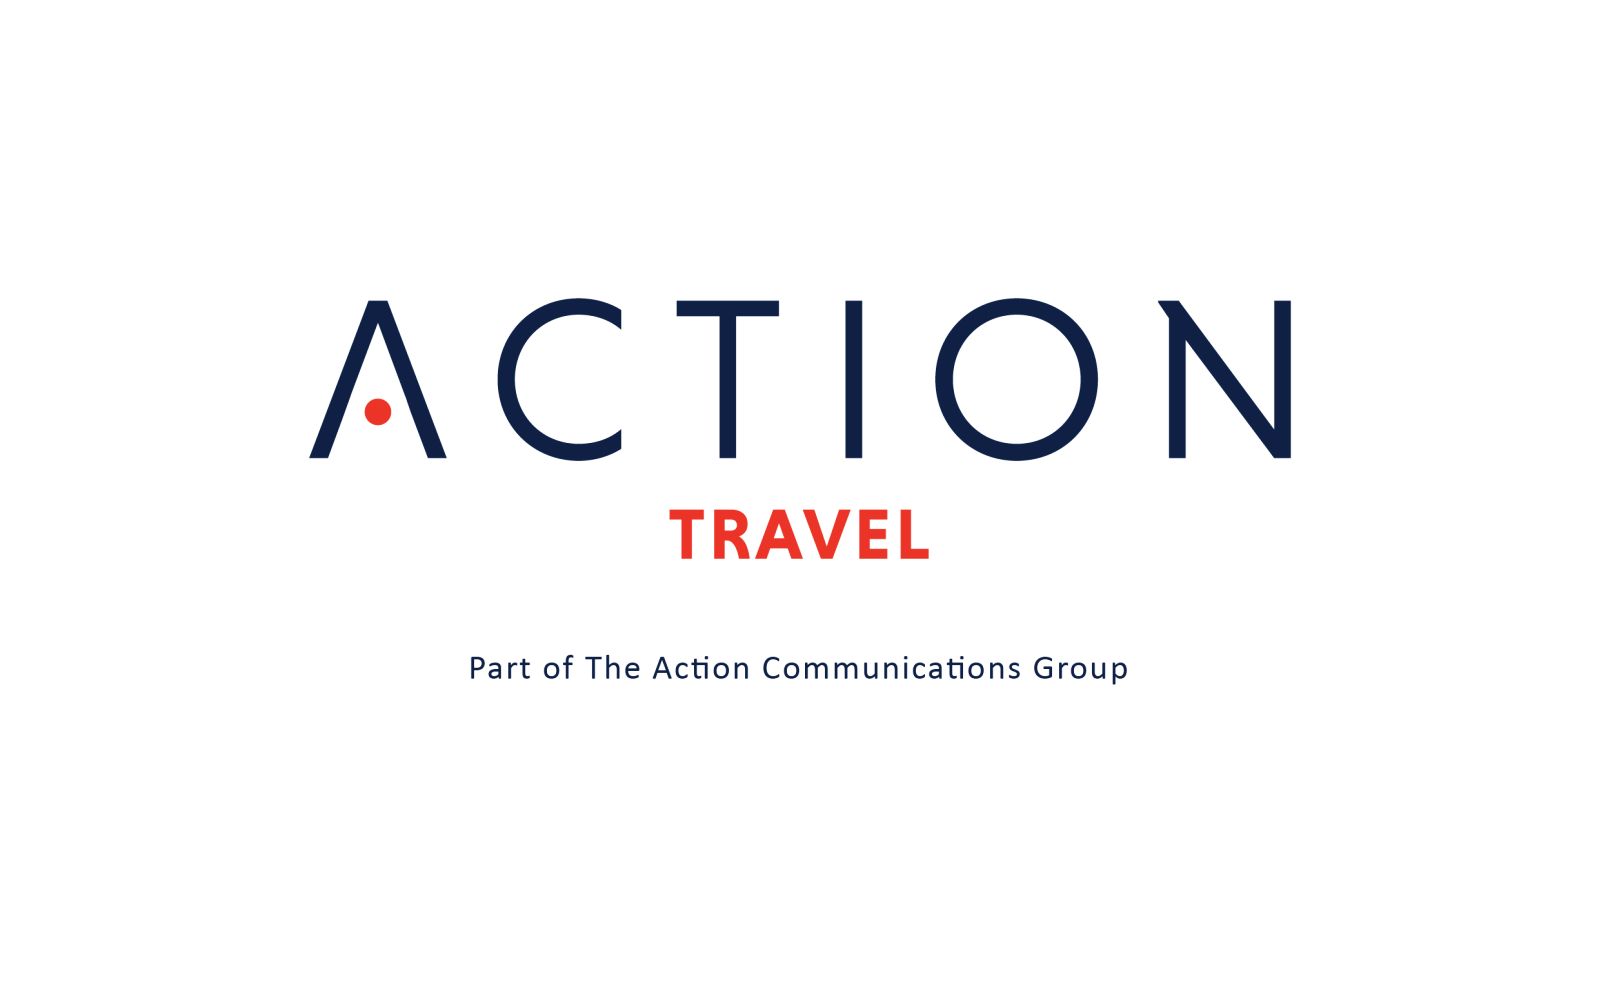 4 action travel